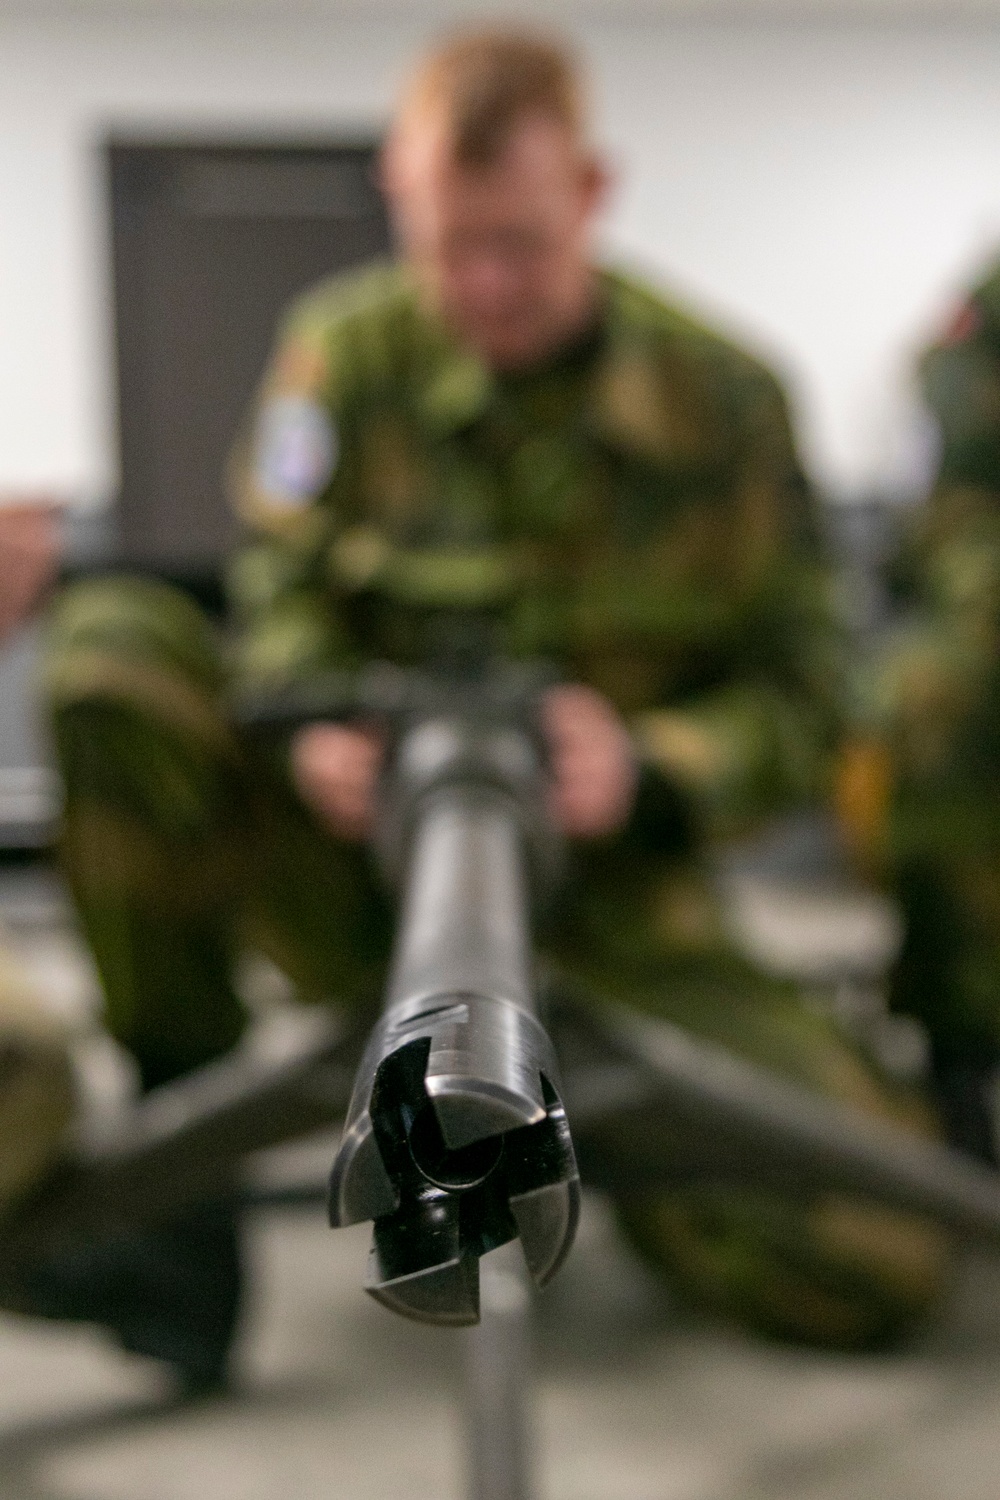 Norwegian Soldiers prepare for crew-served weapons qualification at Camp Ripley